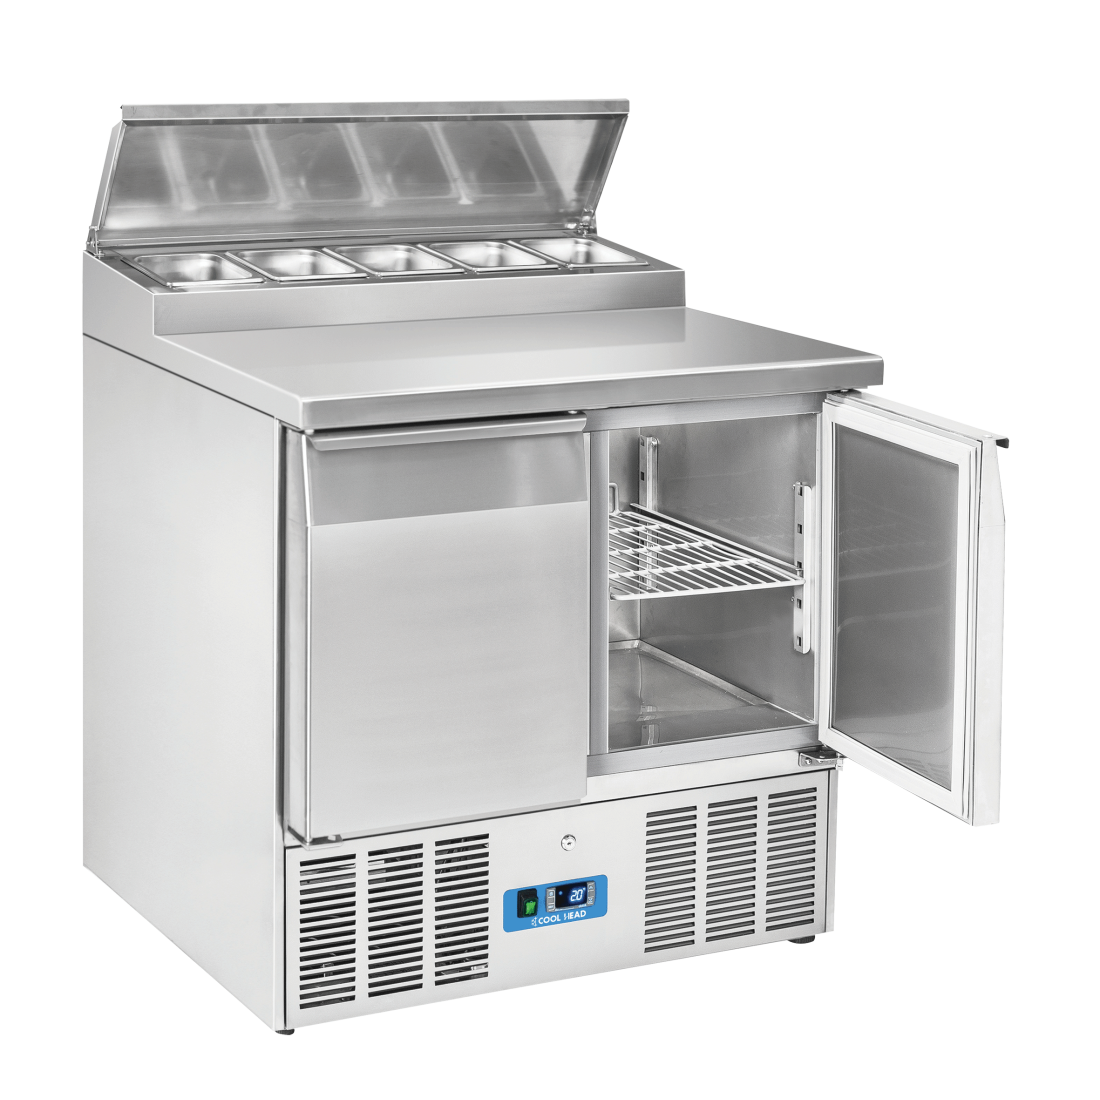 COOL HEAD ,CRS90A, Pizza & Sandwiches Preparation Chiller With Two Doors And Steel Worktop - Depth 70 cm|mkayn|مكاين